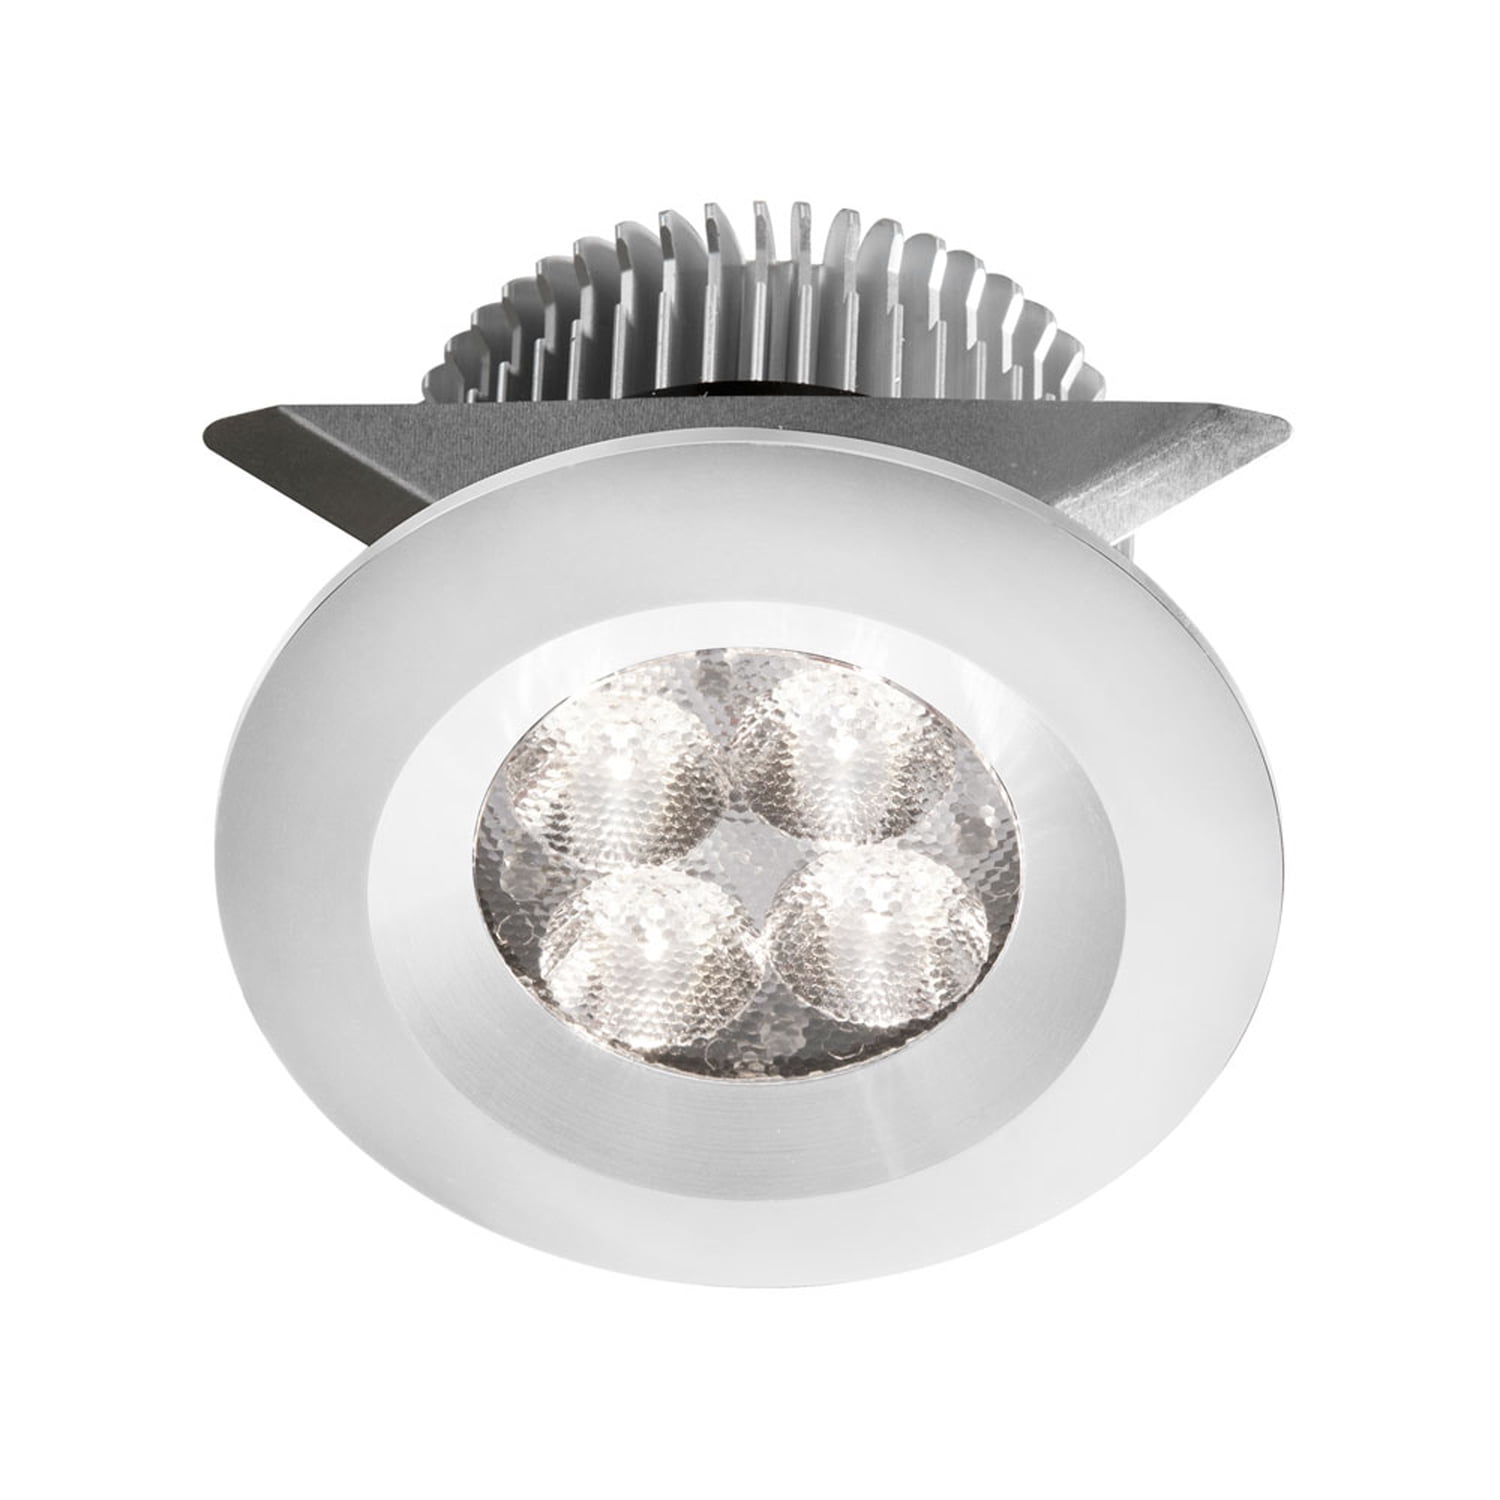 Mp-led-8-wh White 2 X 4w 3000k, Cri80 Plus, 25 Deg Beam, 24v Dc Input With Male Connector, 18 In. Dimmable Lead Wire